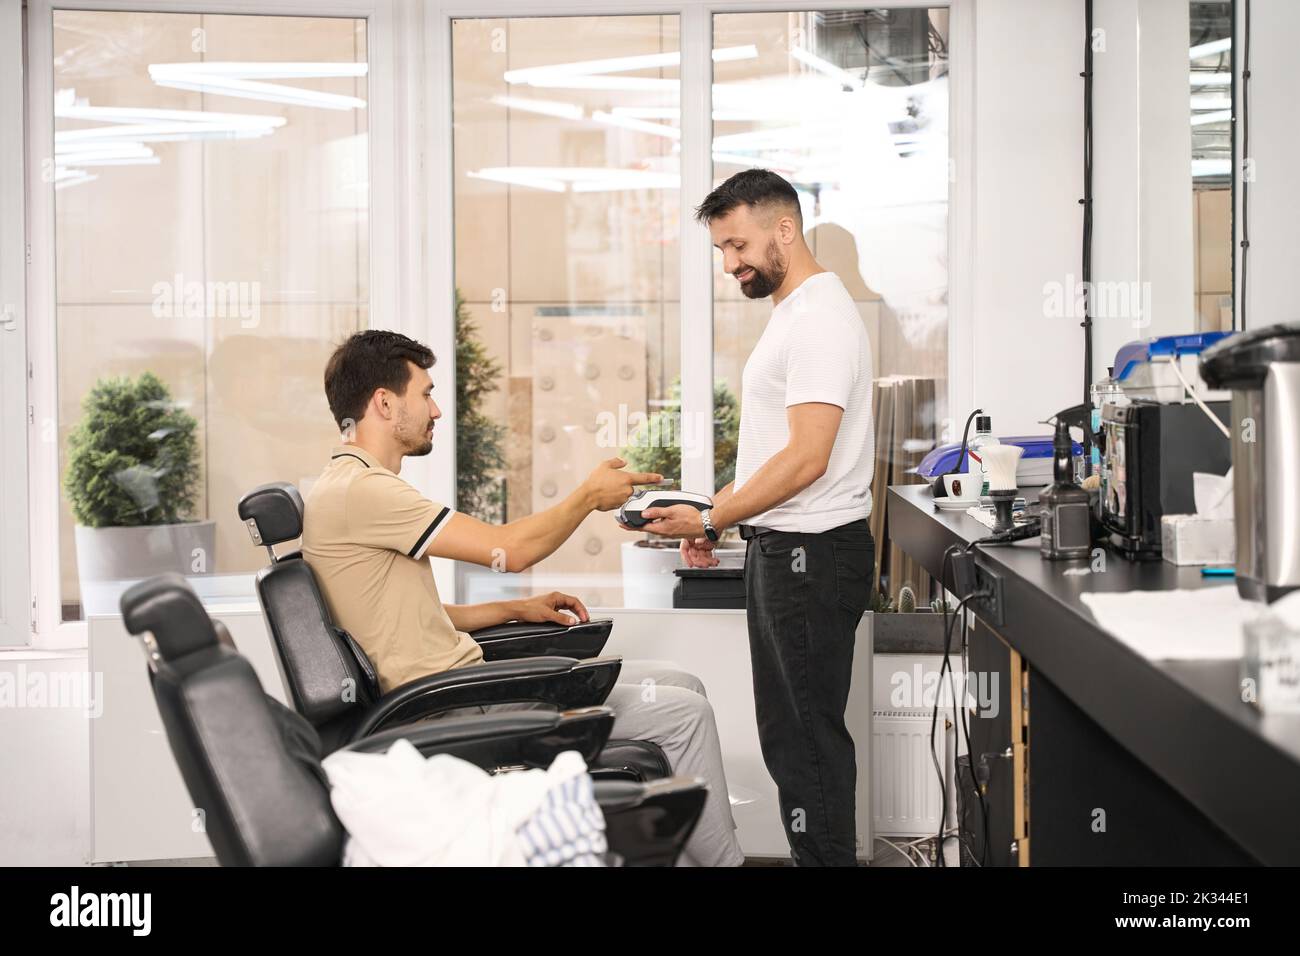 Client of hair salon paying for service cashlessly and contactlessly Stock Photo